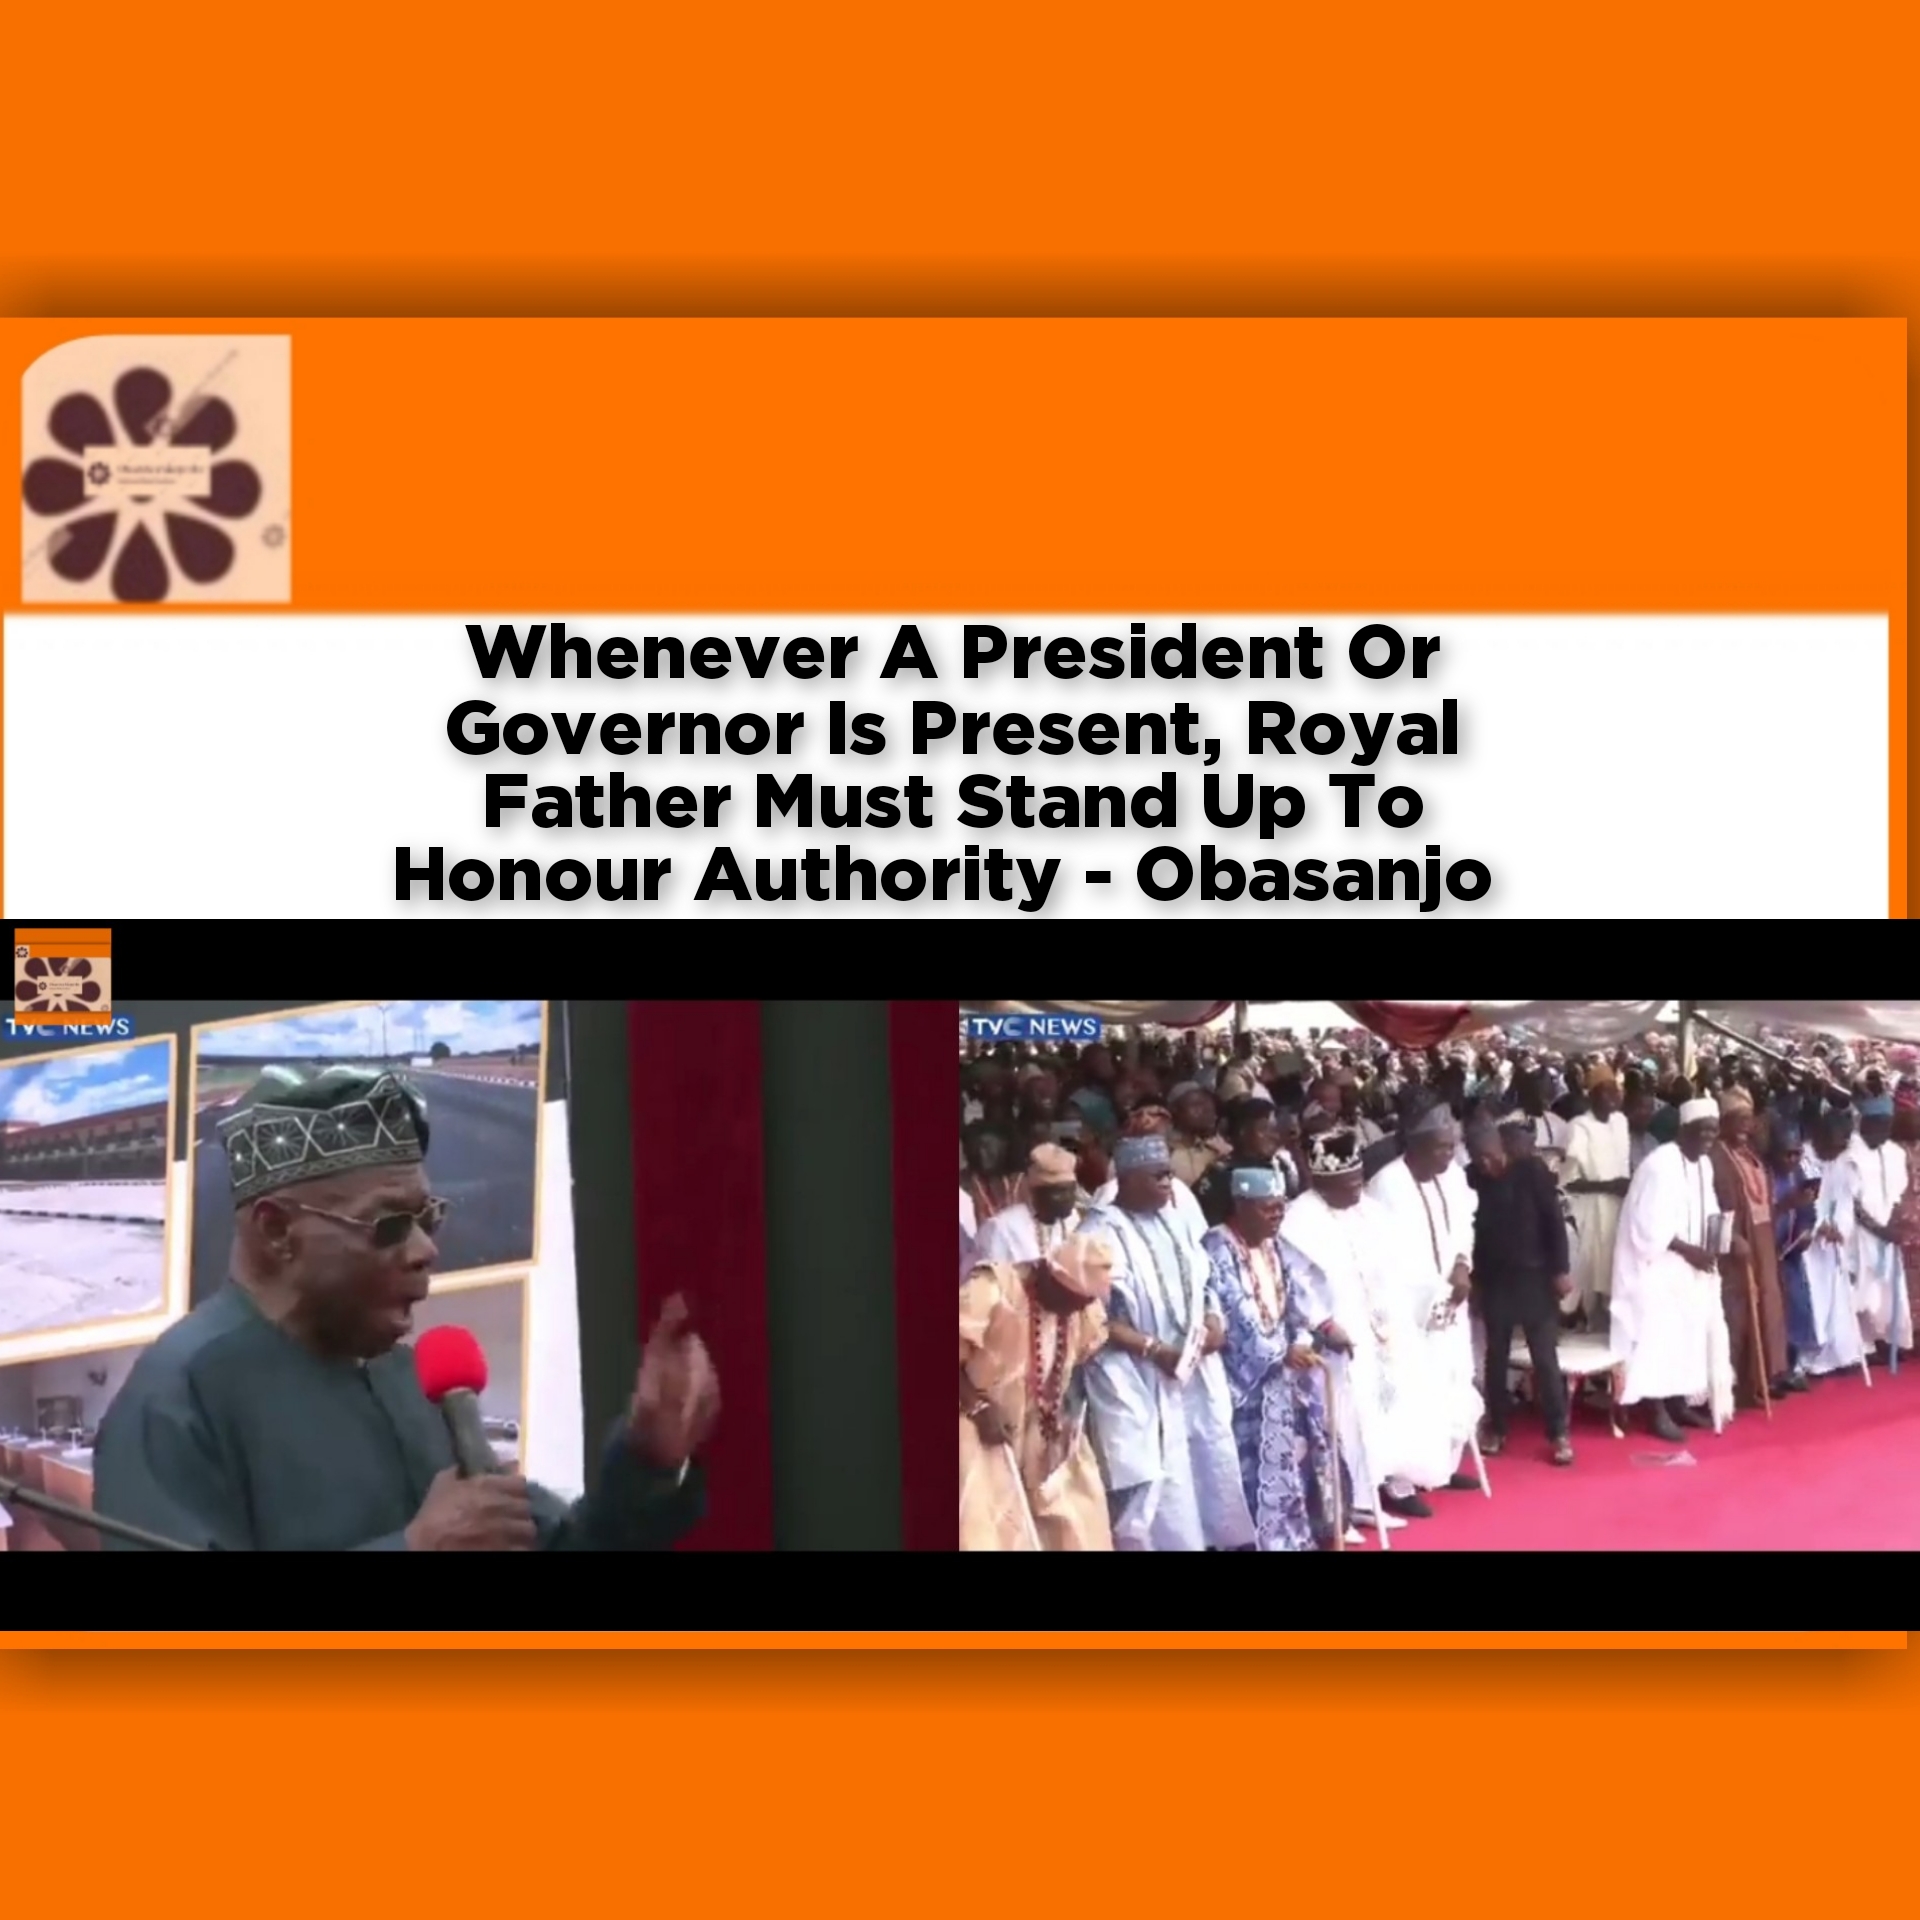 Whenever A President Or Governor Is Present, Royal Father Must Stand Up To Honour Authority - Obasanjo ~ OsazuwaAkonedo #Sowore